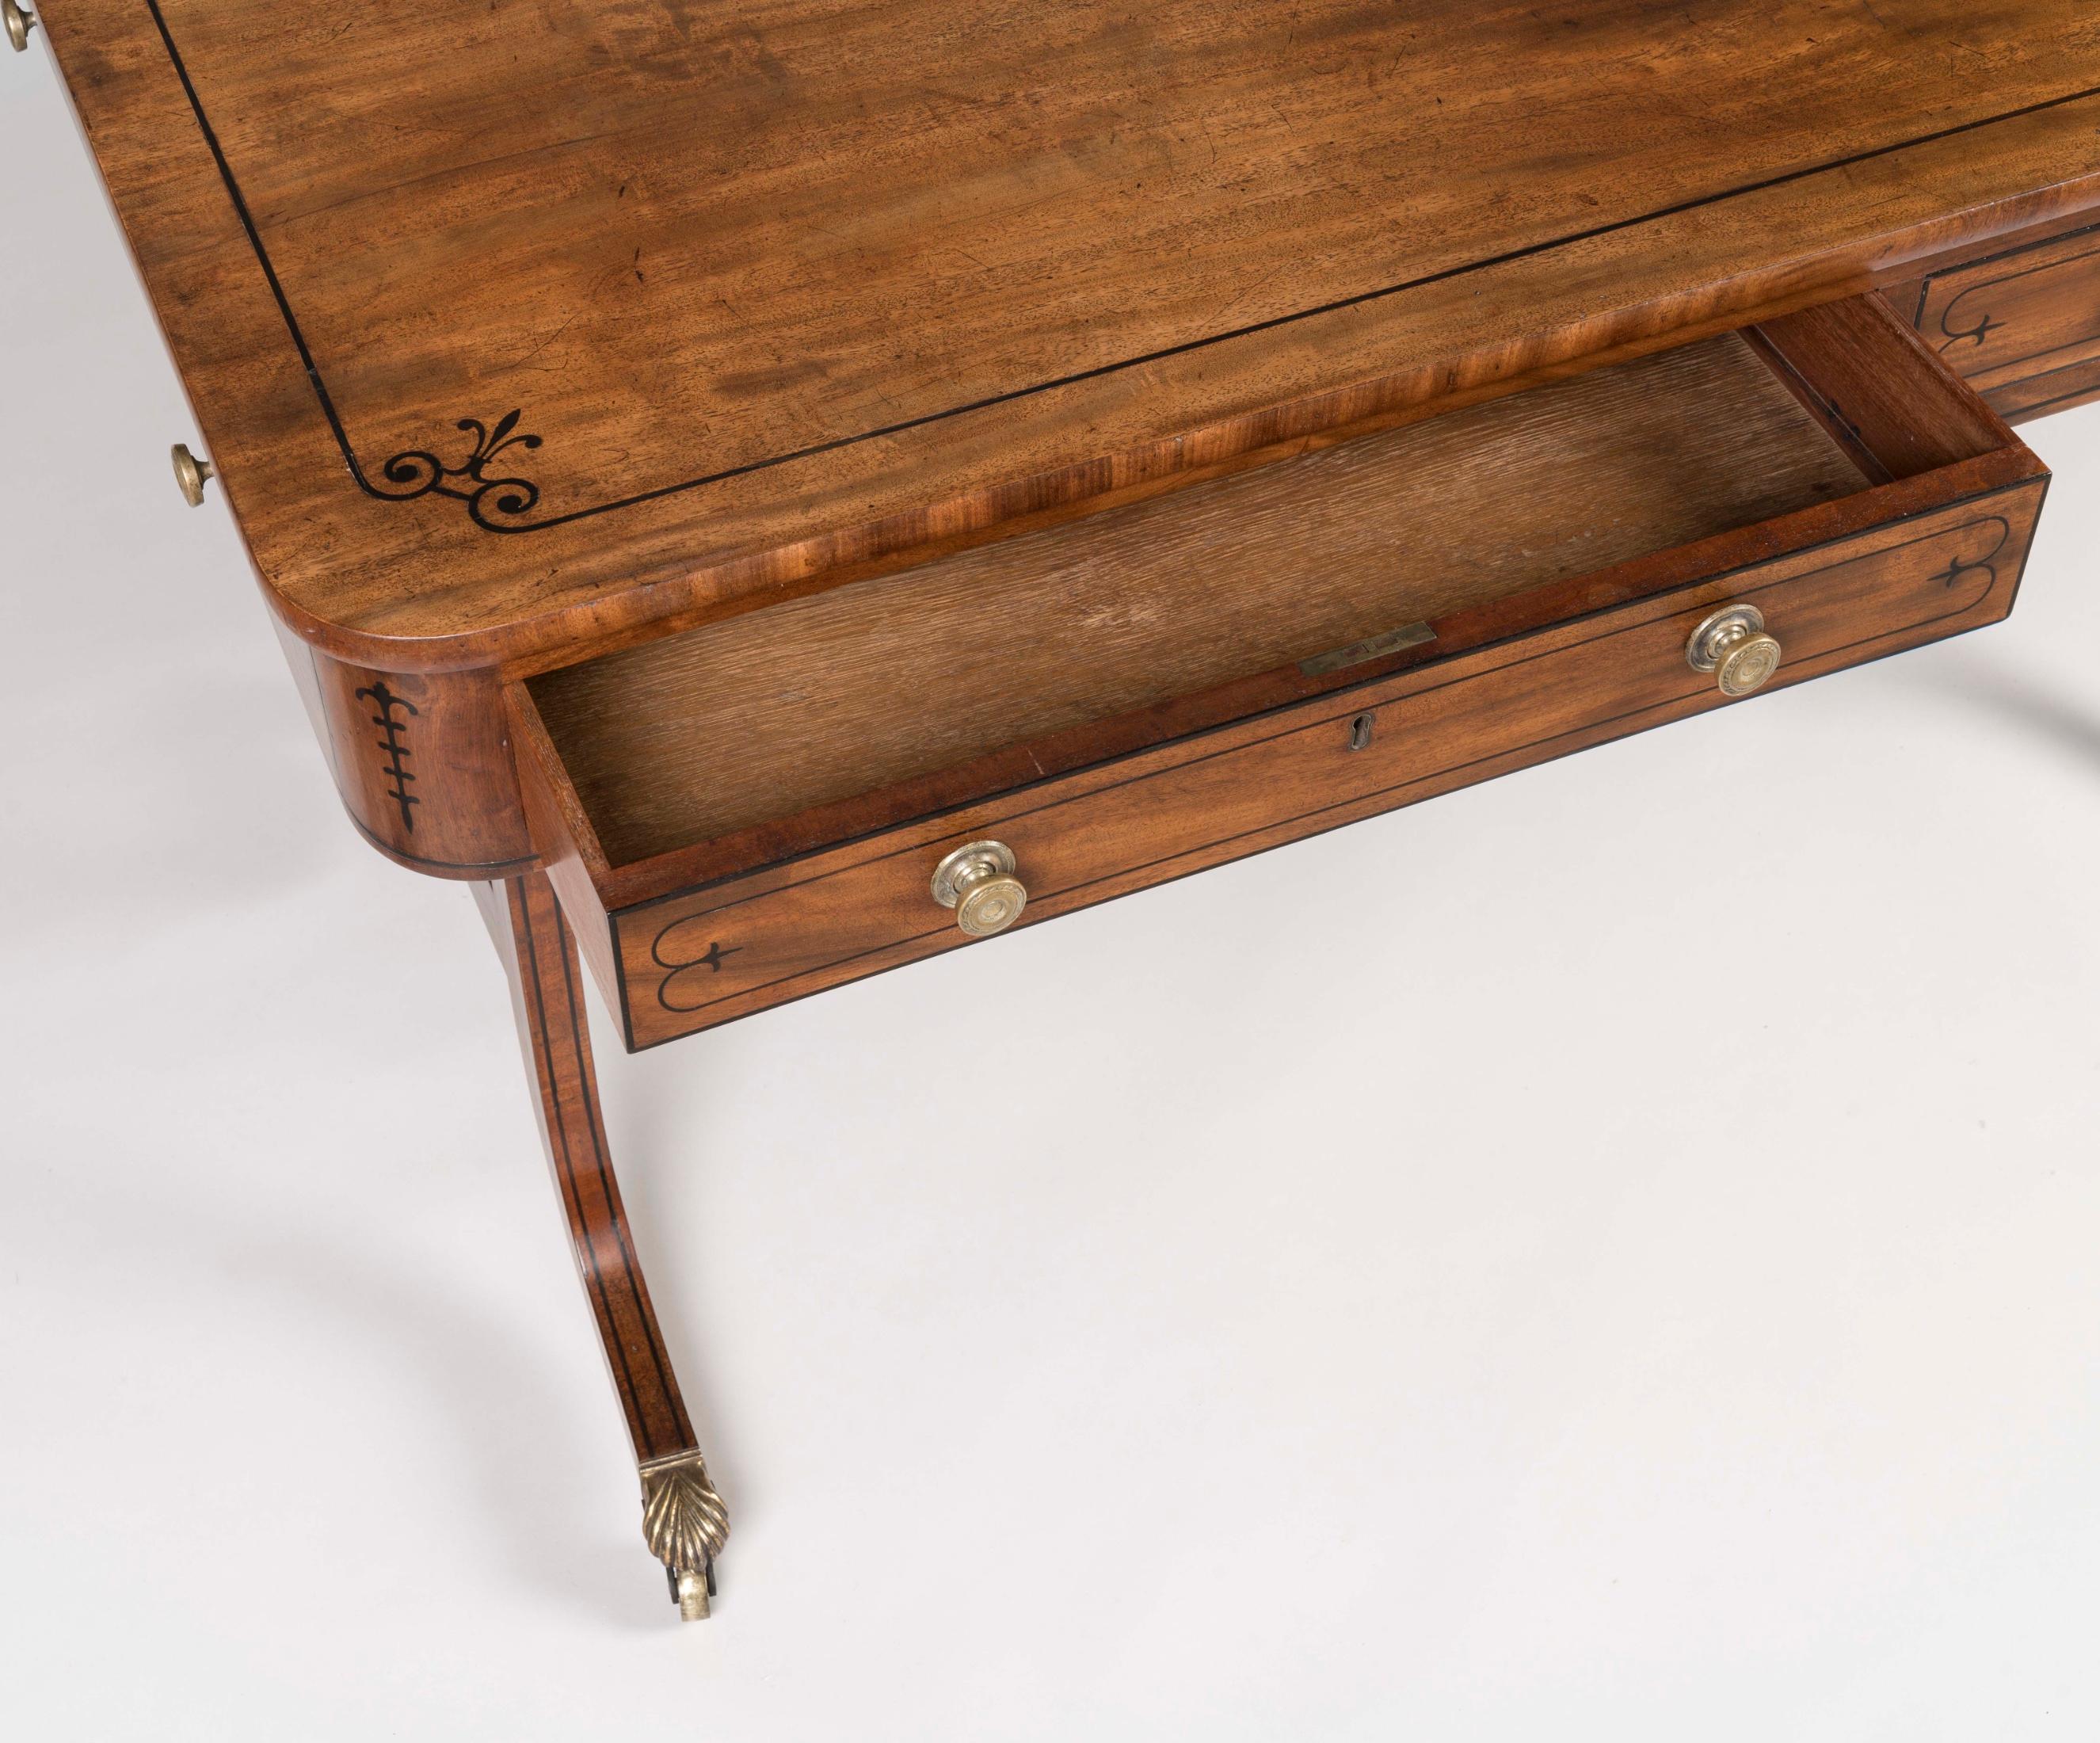 Elegant English Regency Period Mahogany Table with Inlaid Details For Sale 1